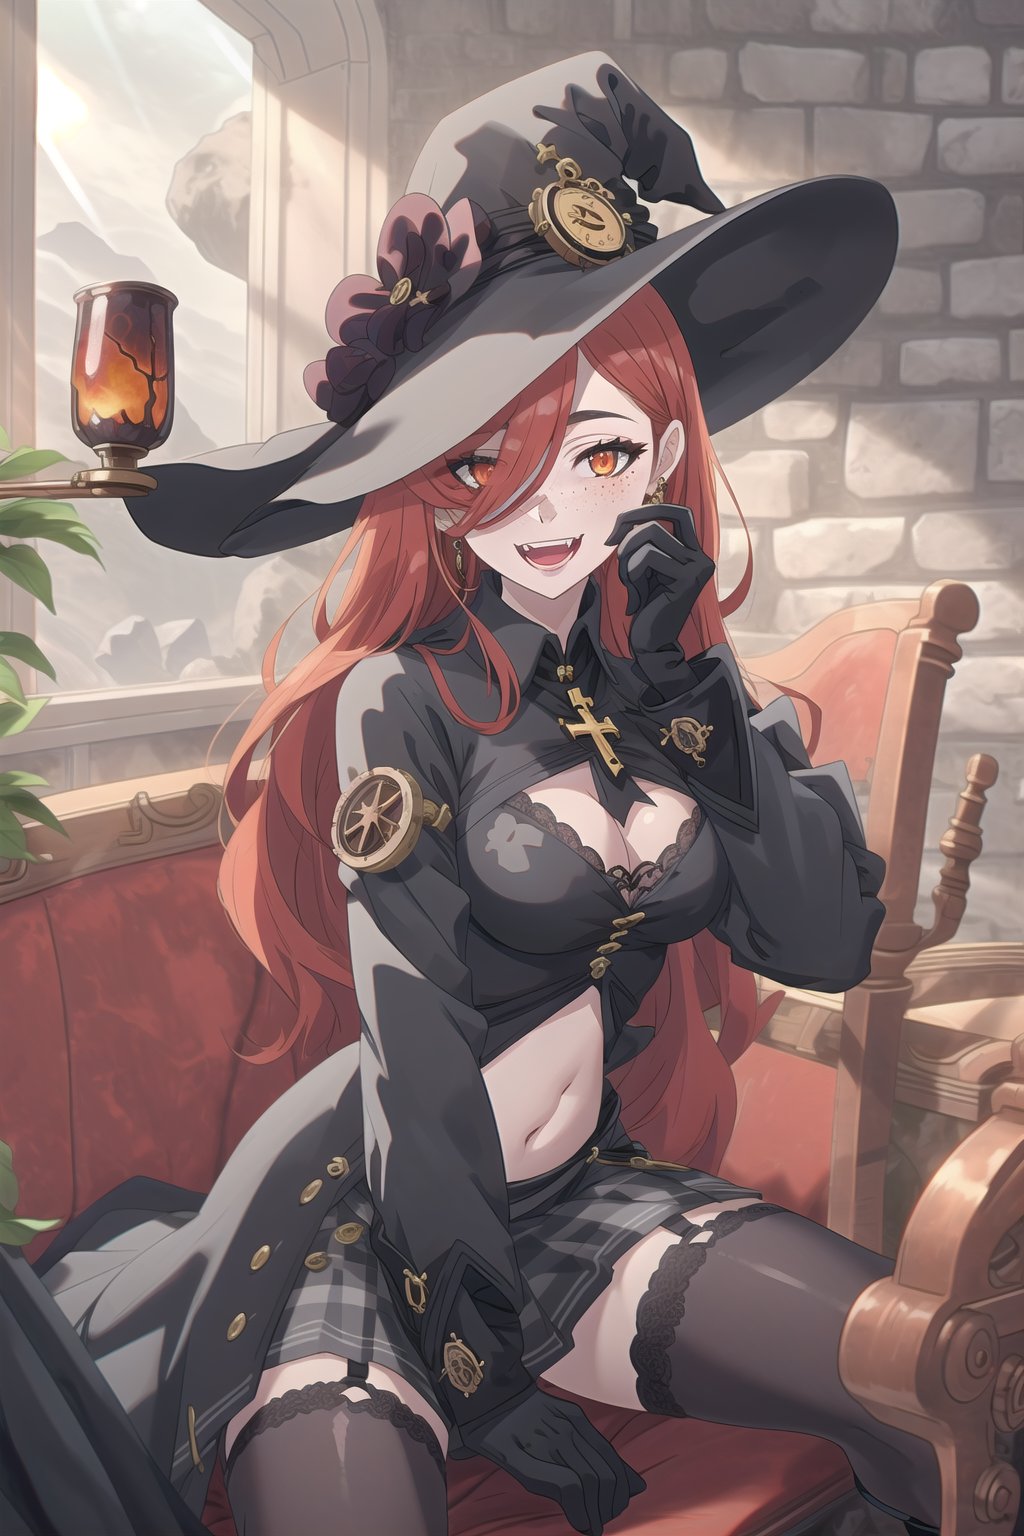 nier anime style illustration, best quality, masterpiece High resolution, good detail, bright colors, HDR, 4K. Dolby vision high.

Redhead witch with long straight hair, freckles, blushing, orange eyes (a black cross patch covering the eye), red earrings

Black steampunk fantasua crop top

Showing navel, exposed navel 

medium breasts

Showing breasts, exposed breasts 

black cape 

Vintage steampunk fantasy black checkered skirt

black stockings

Elegant British style steampunk black boots

A volcanic rock castle with lava on the walls, volcanic floor 

Red sun rays coming through the window 

She is sitting on a royal throne of smooth black stone.

lava falling down the walls 

Flirty smile (yandere smile). Happy, excited. Open mouth 

Showing fangs, exposed fangs

selfie 

(A hand on one's own face)

Steampunk elegant black gloves

Black witch hat